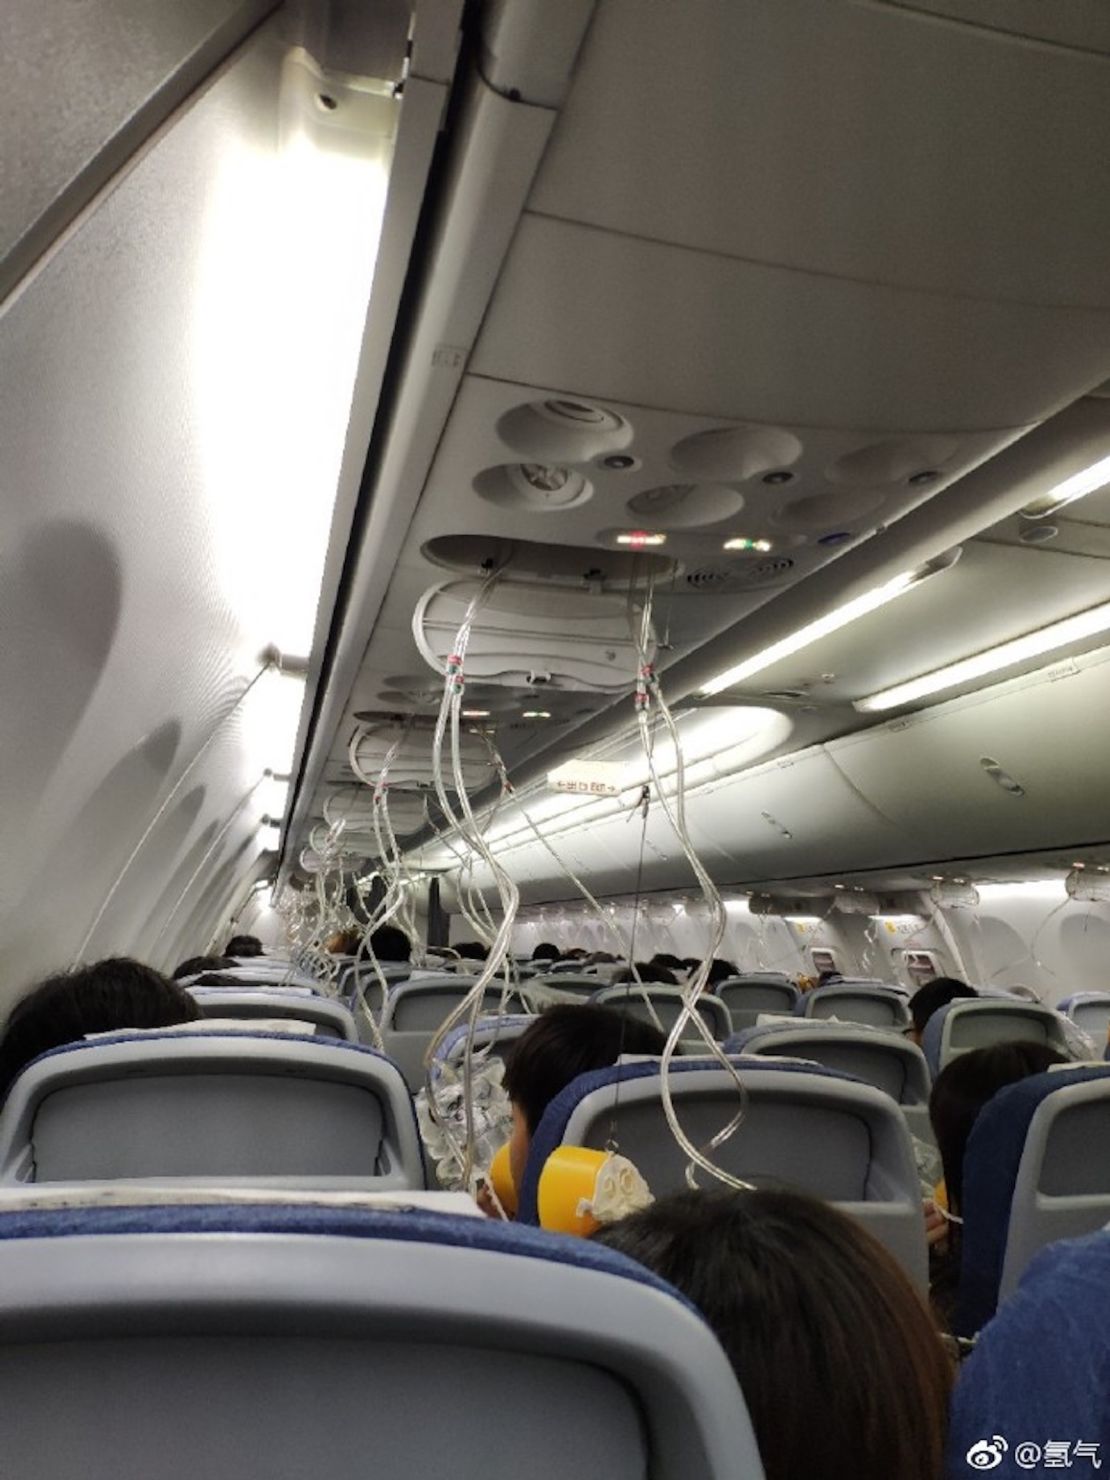 Passengers were required to wear oxygen masks after a loss of cabin pressure caused the plane to drop in the sky.